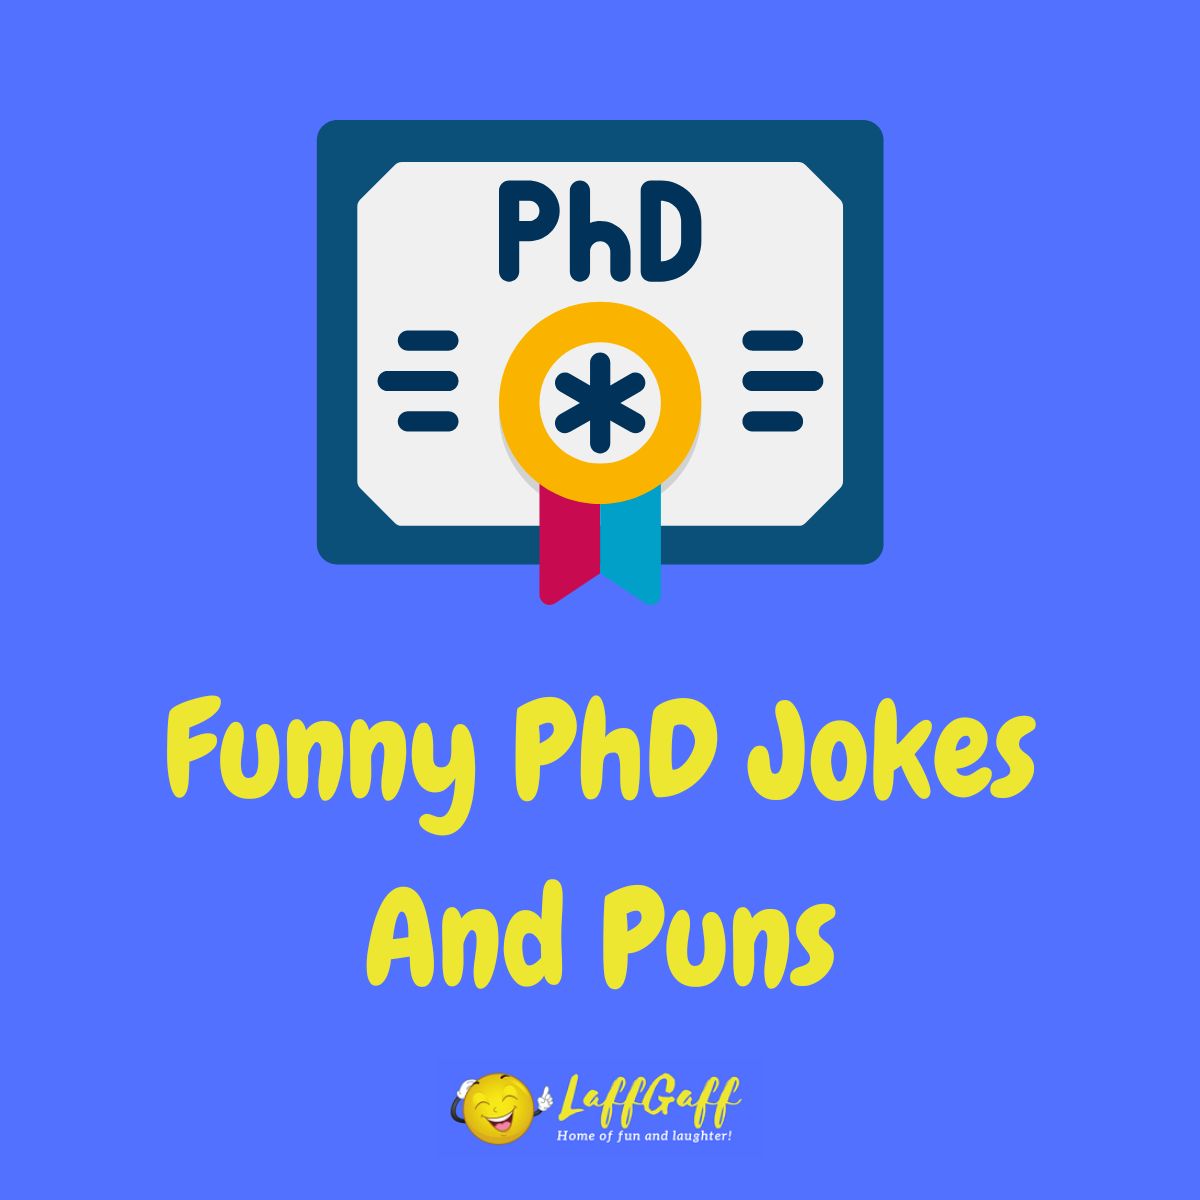 Featured image for a page of funny PhD jokes and puns.